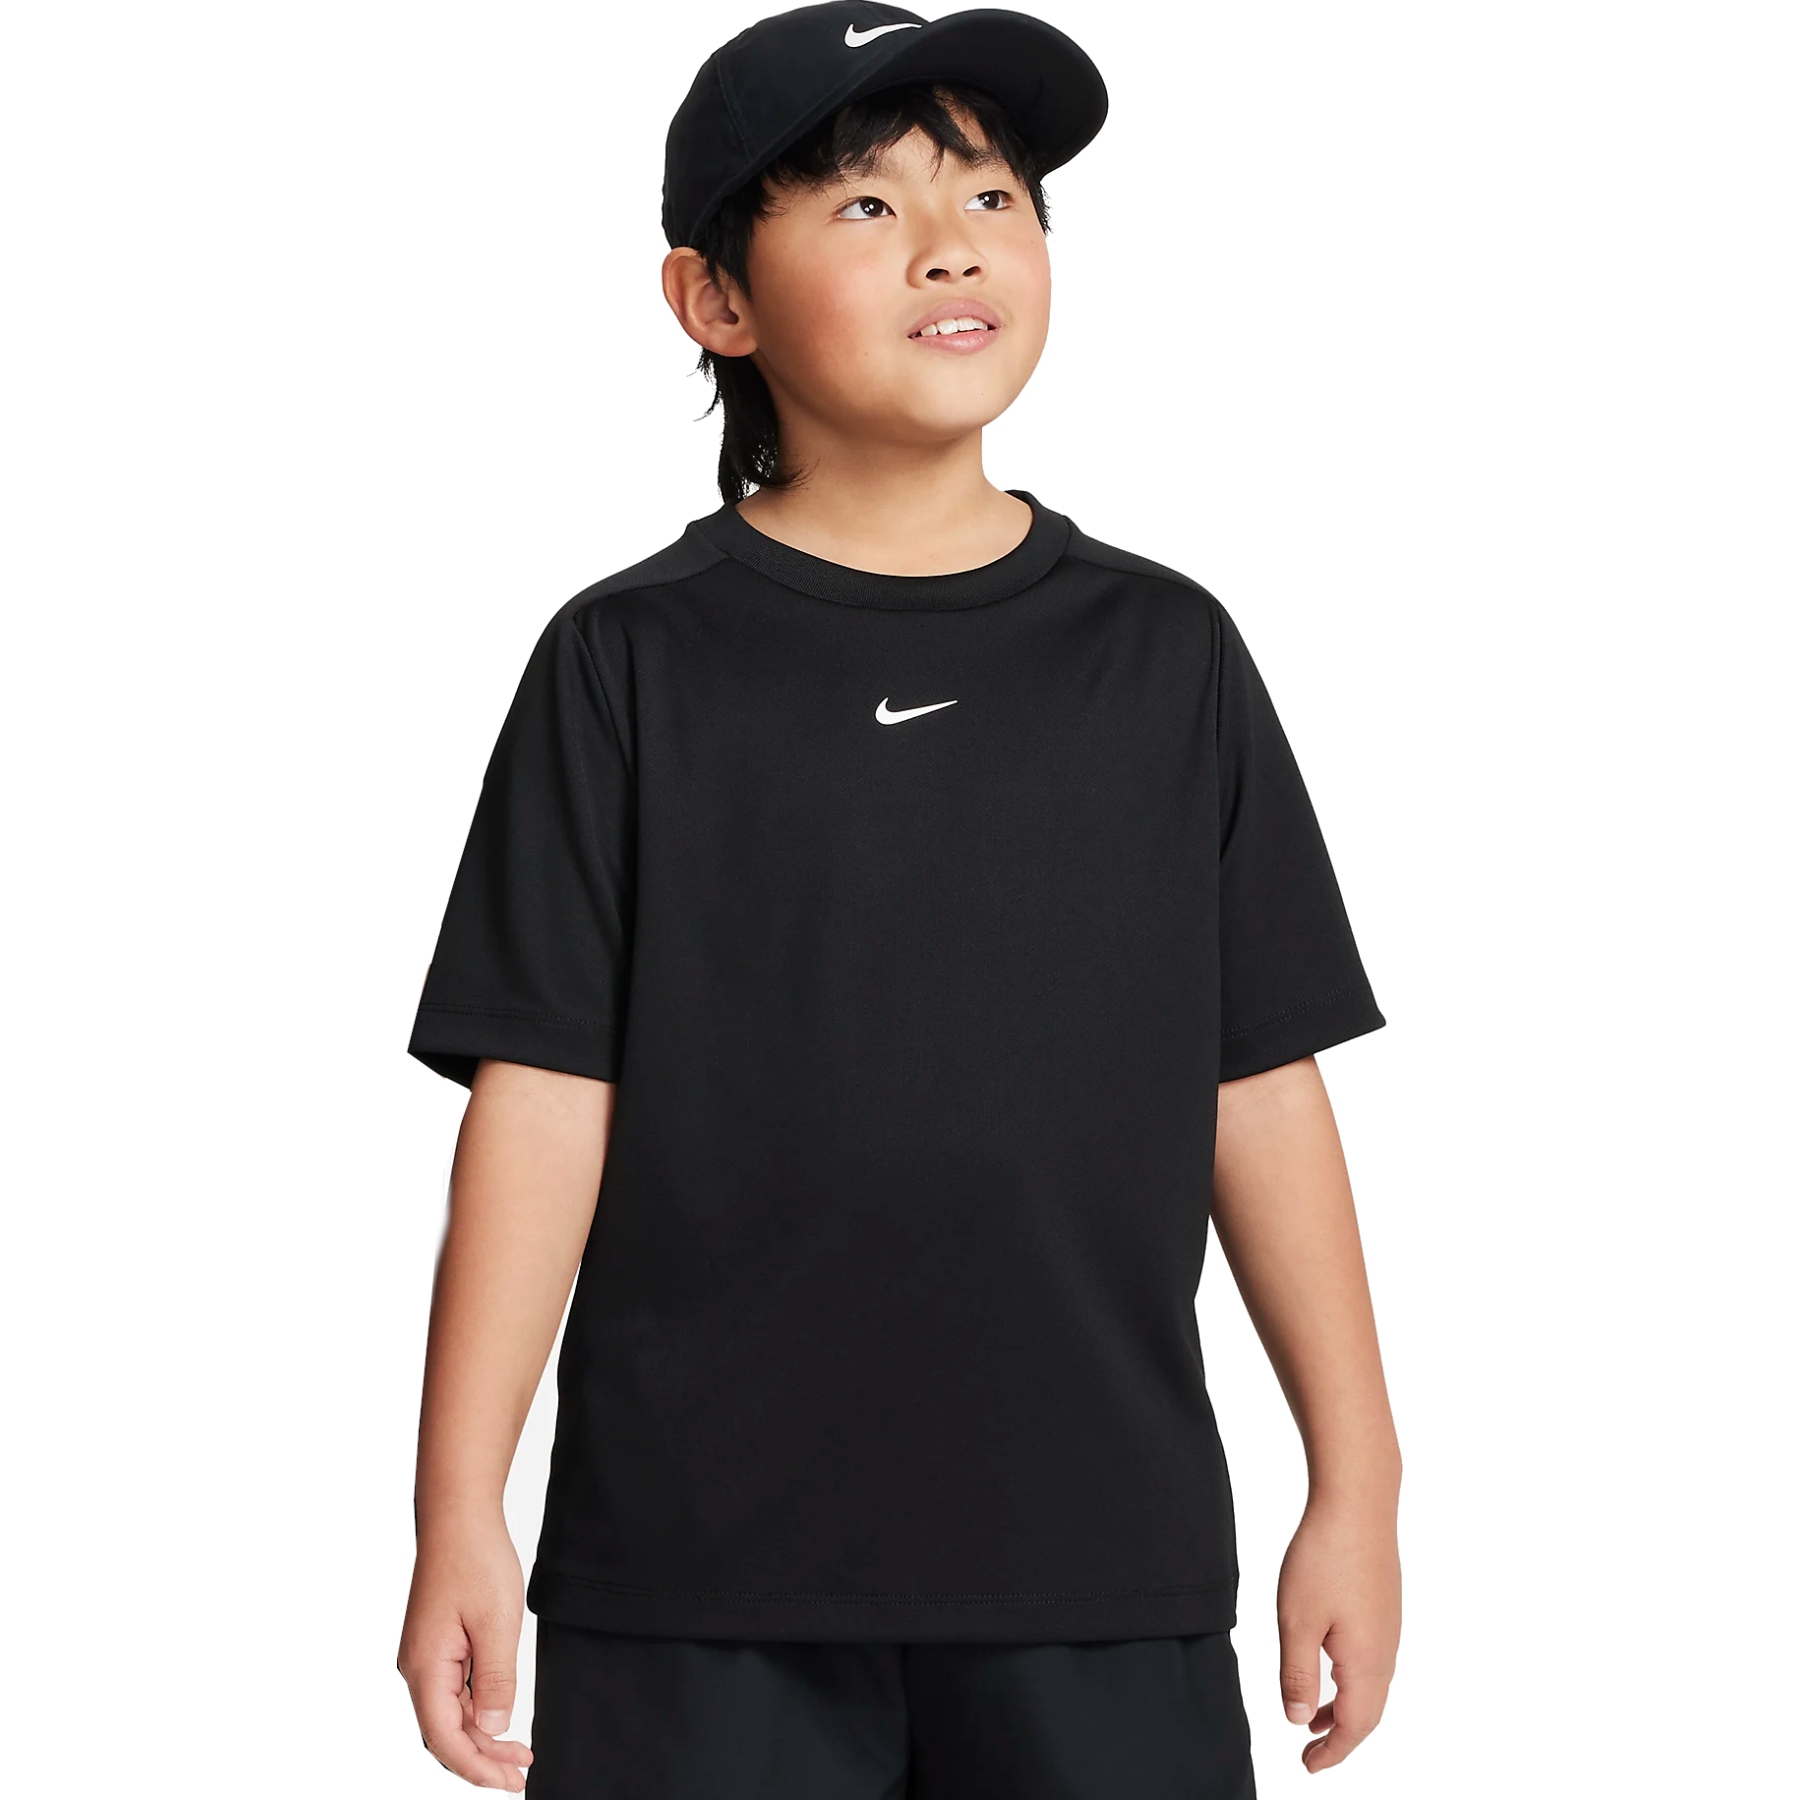 Picture of Nike Multi Dri-FIT Shortsleeve Training Top for Kids - black DX5380-010